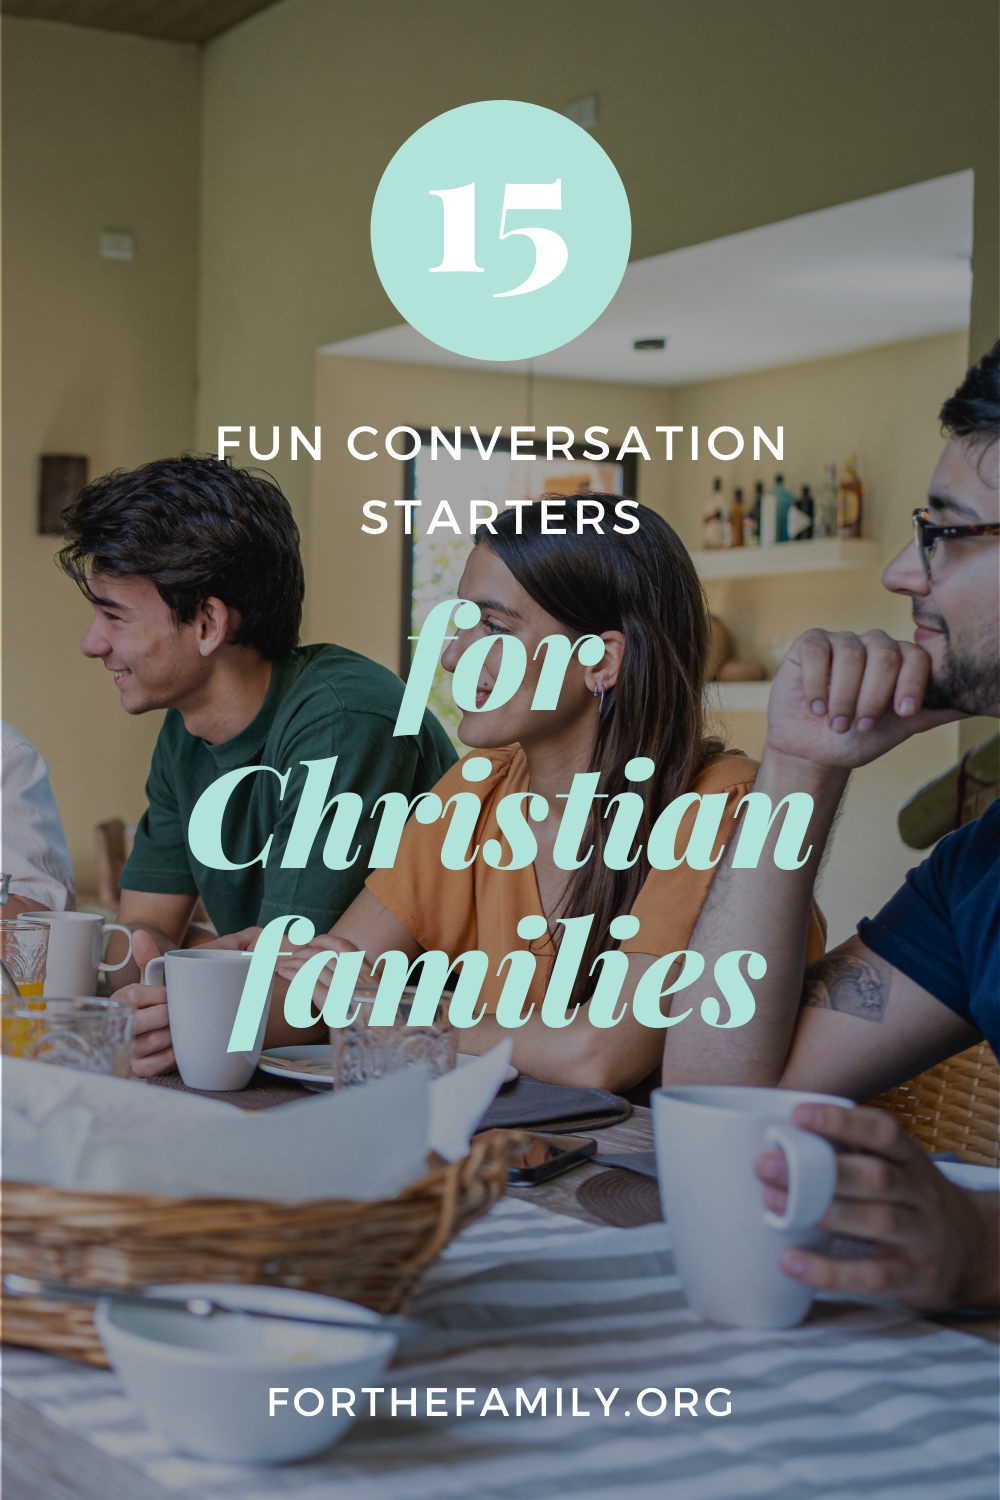 15 Fun Conversation Starters for Christian Families